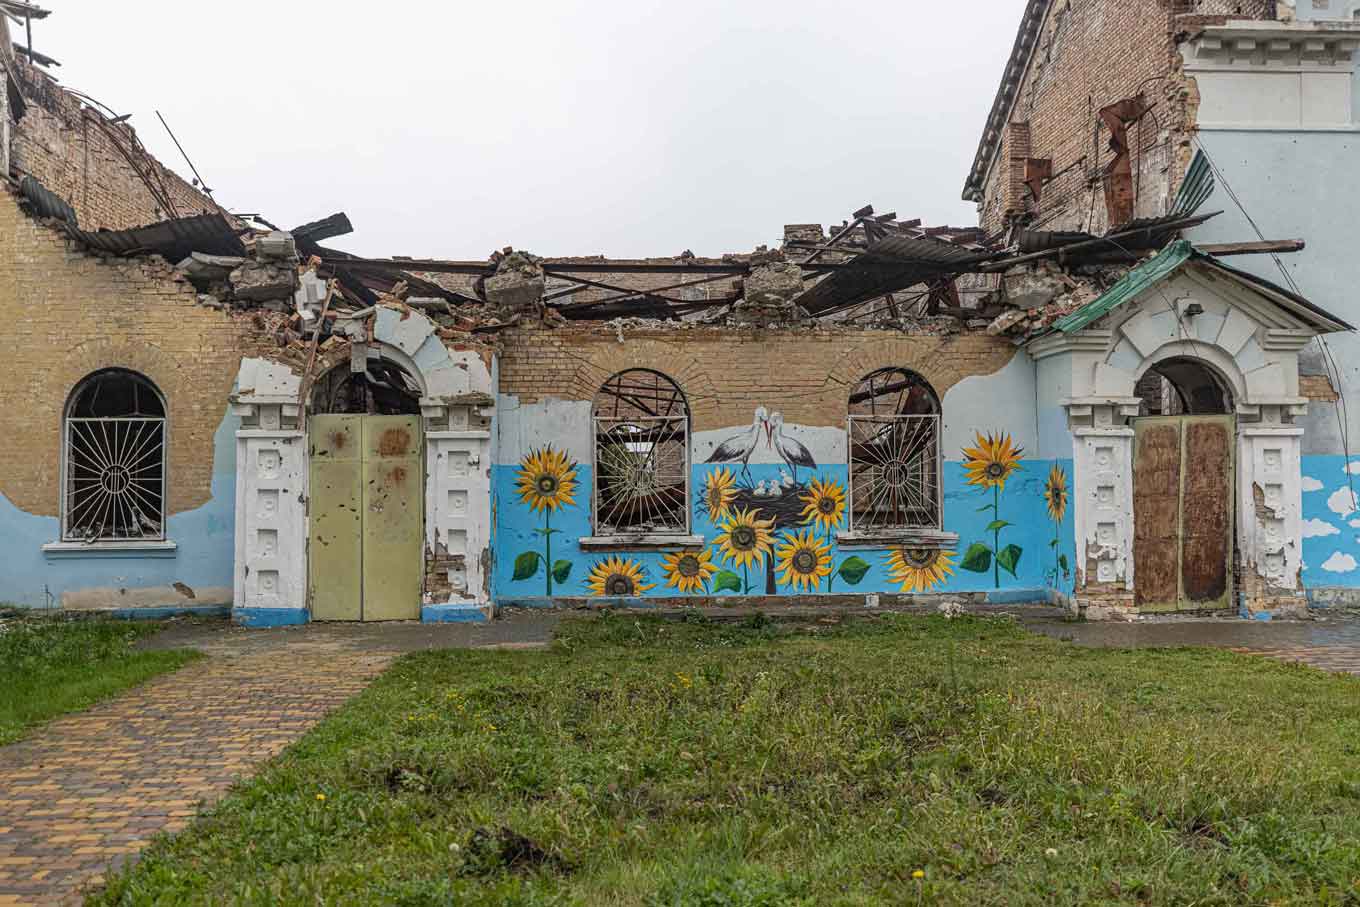 A destroyed building covered in paintings of sunflowers in Ukraine